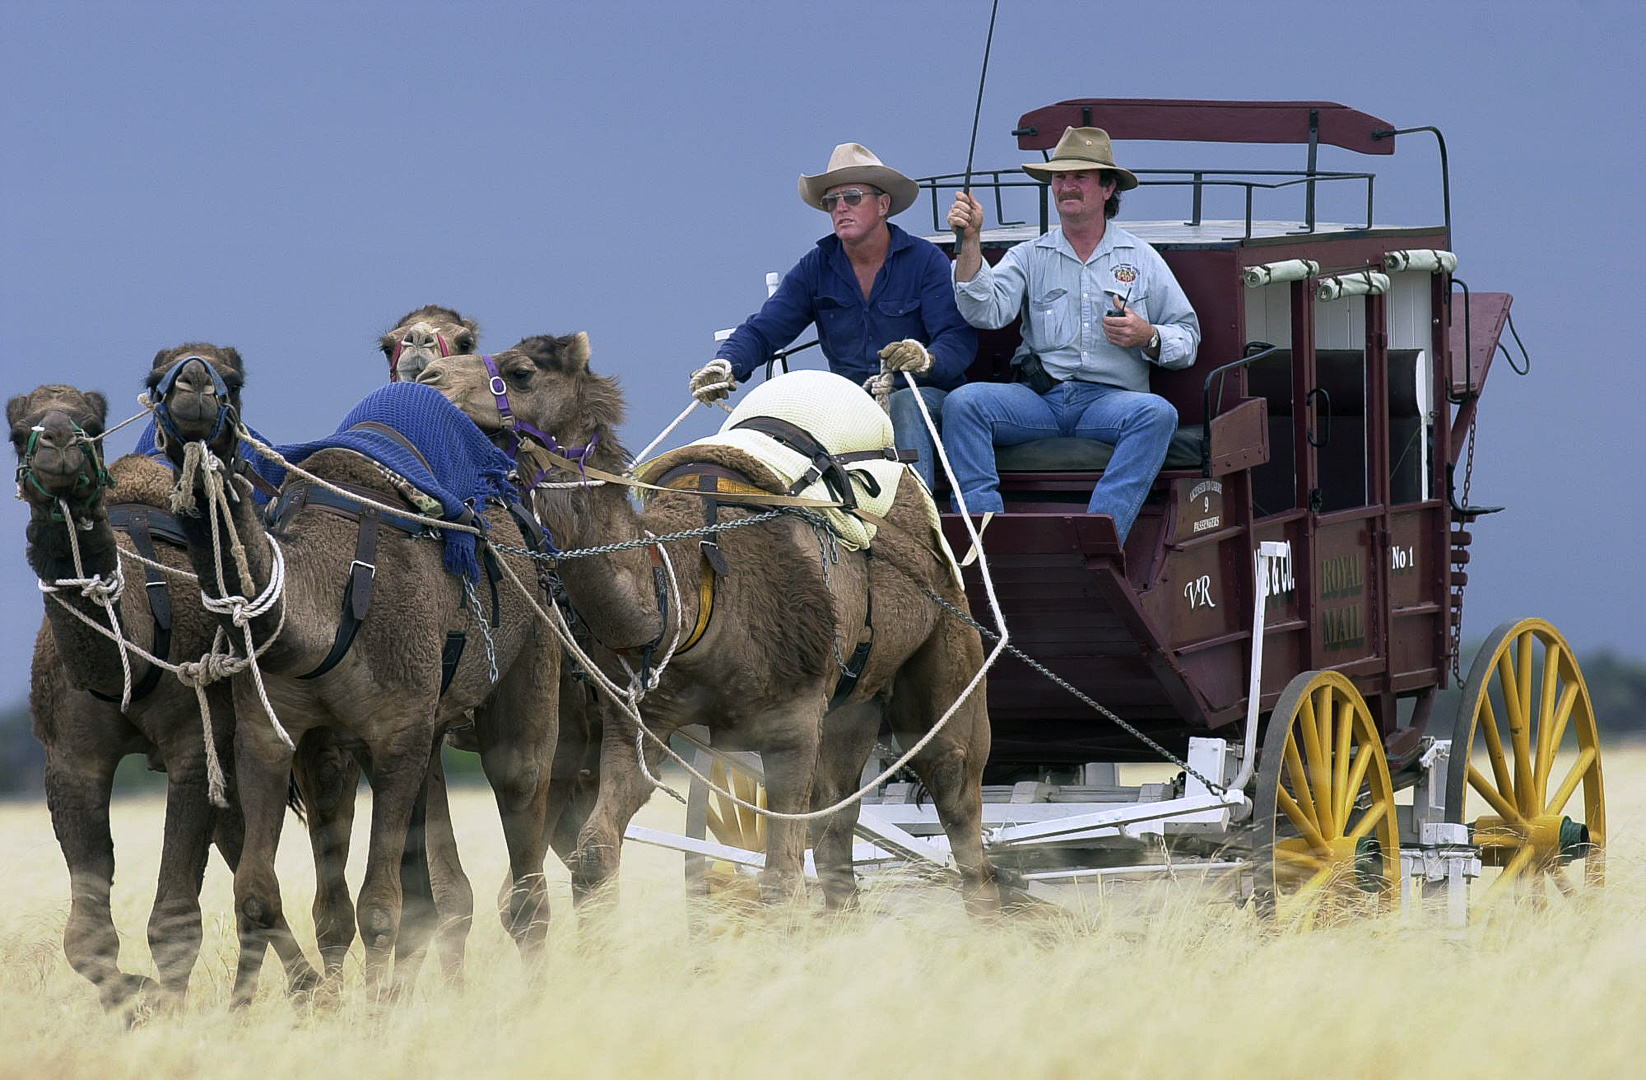 Camel Cobb and Co at Winton, Outback Qld. June 2001